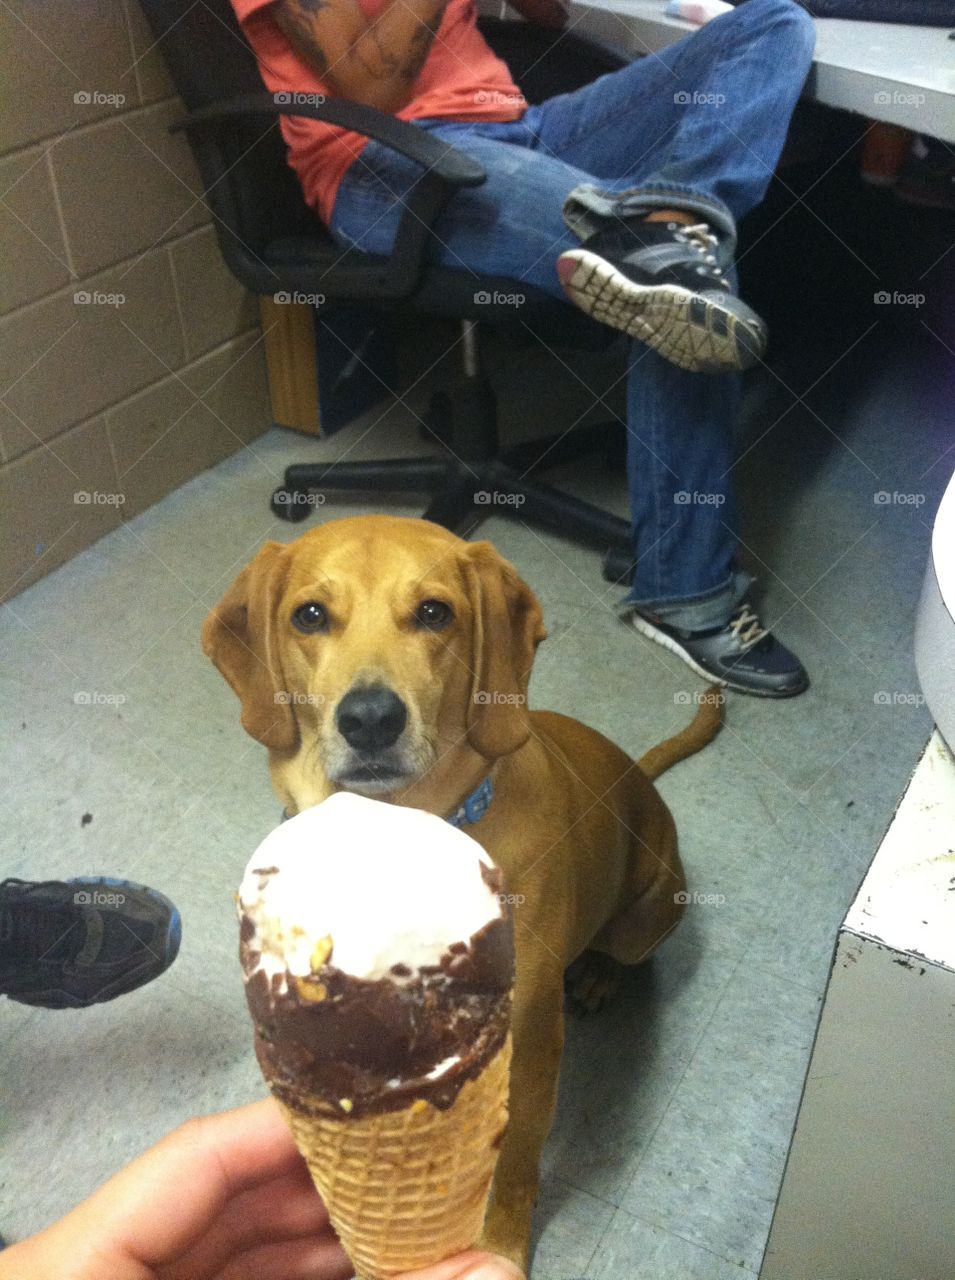 You better gimme that ice cream human! 